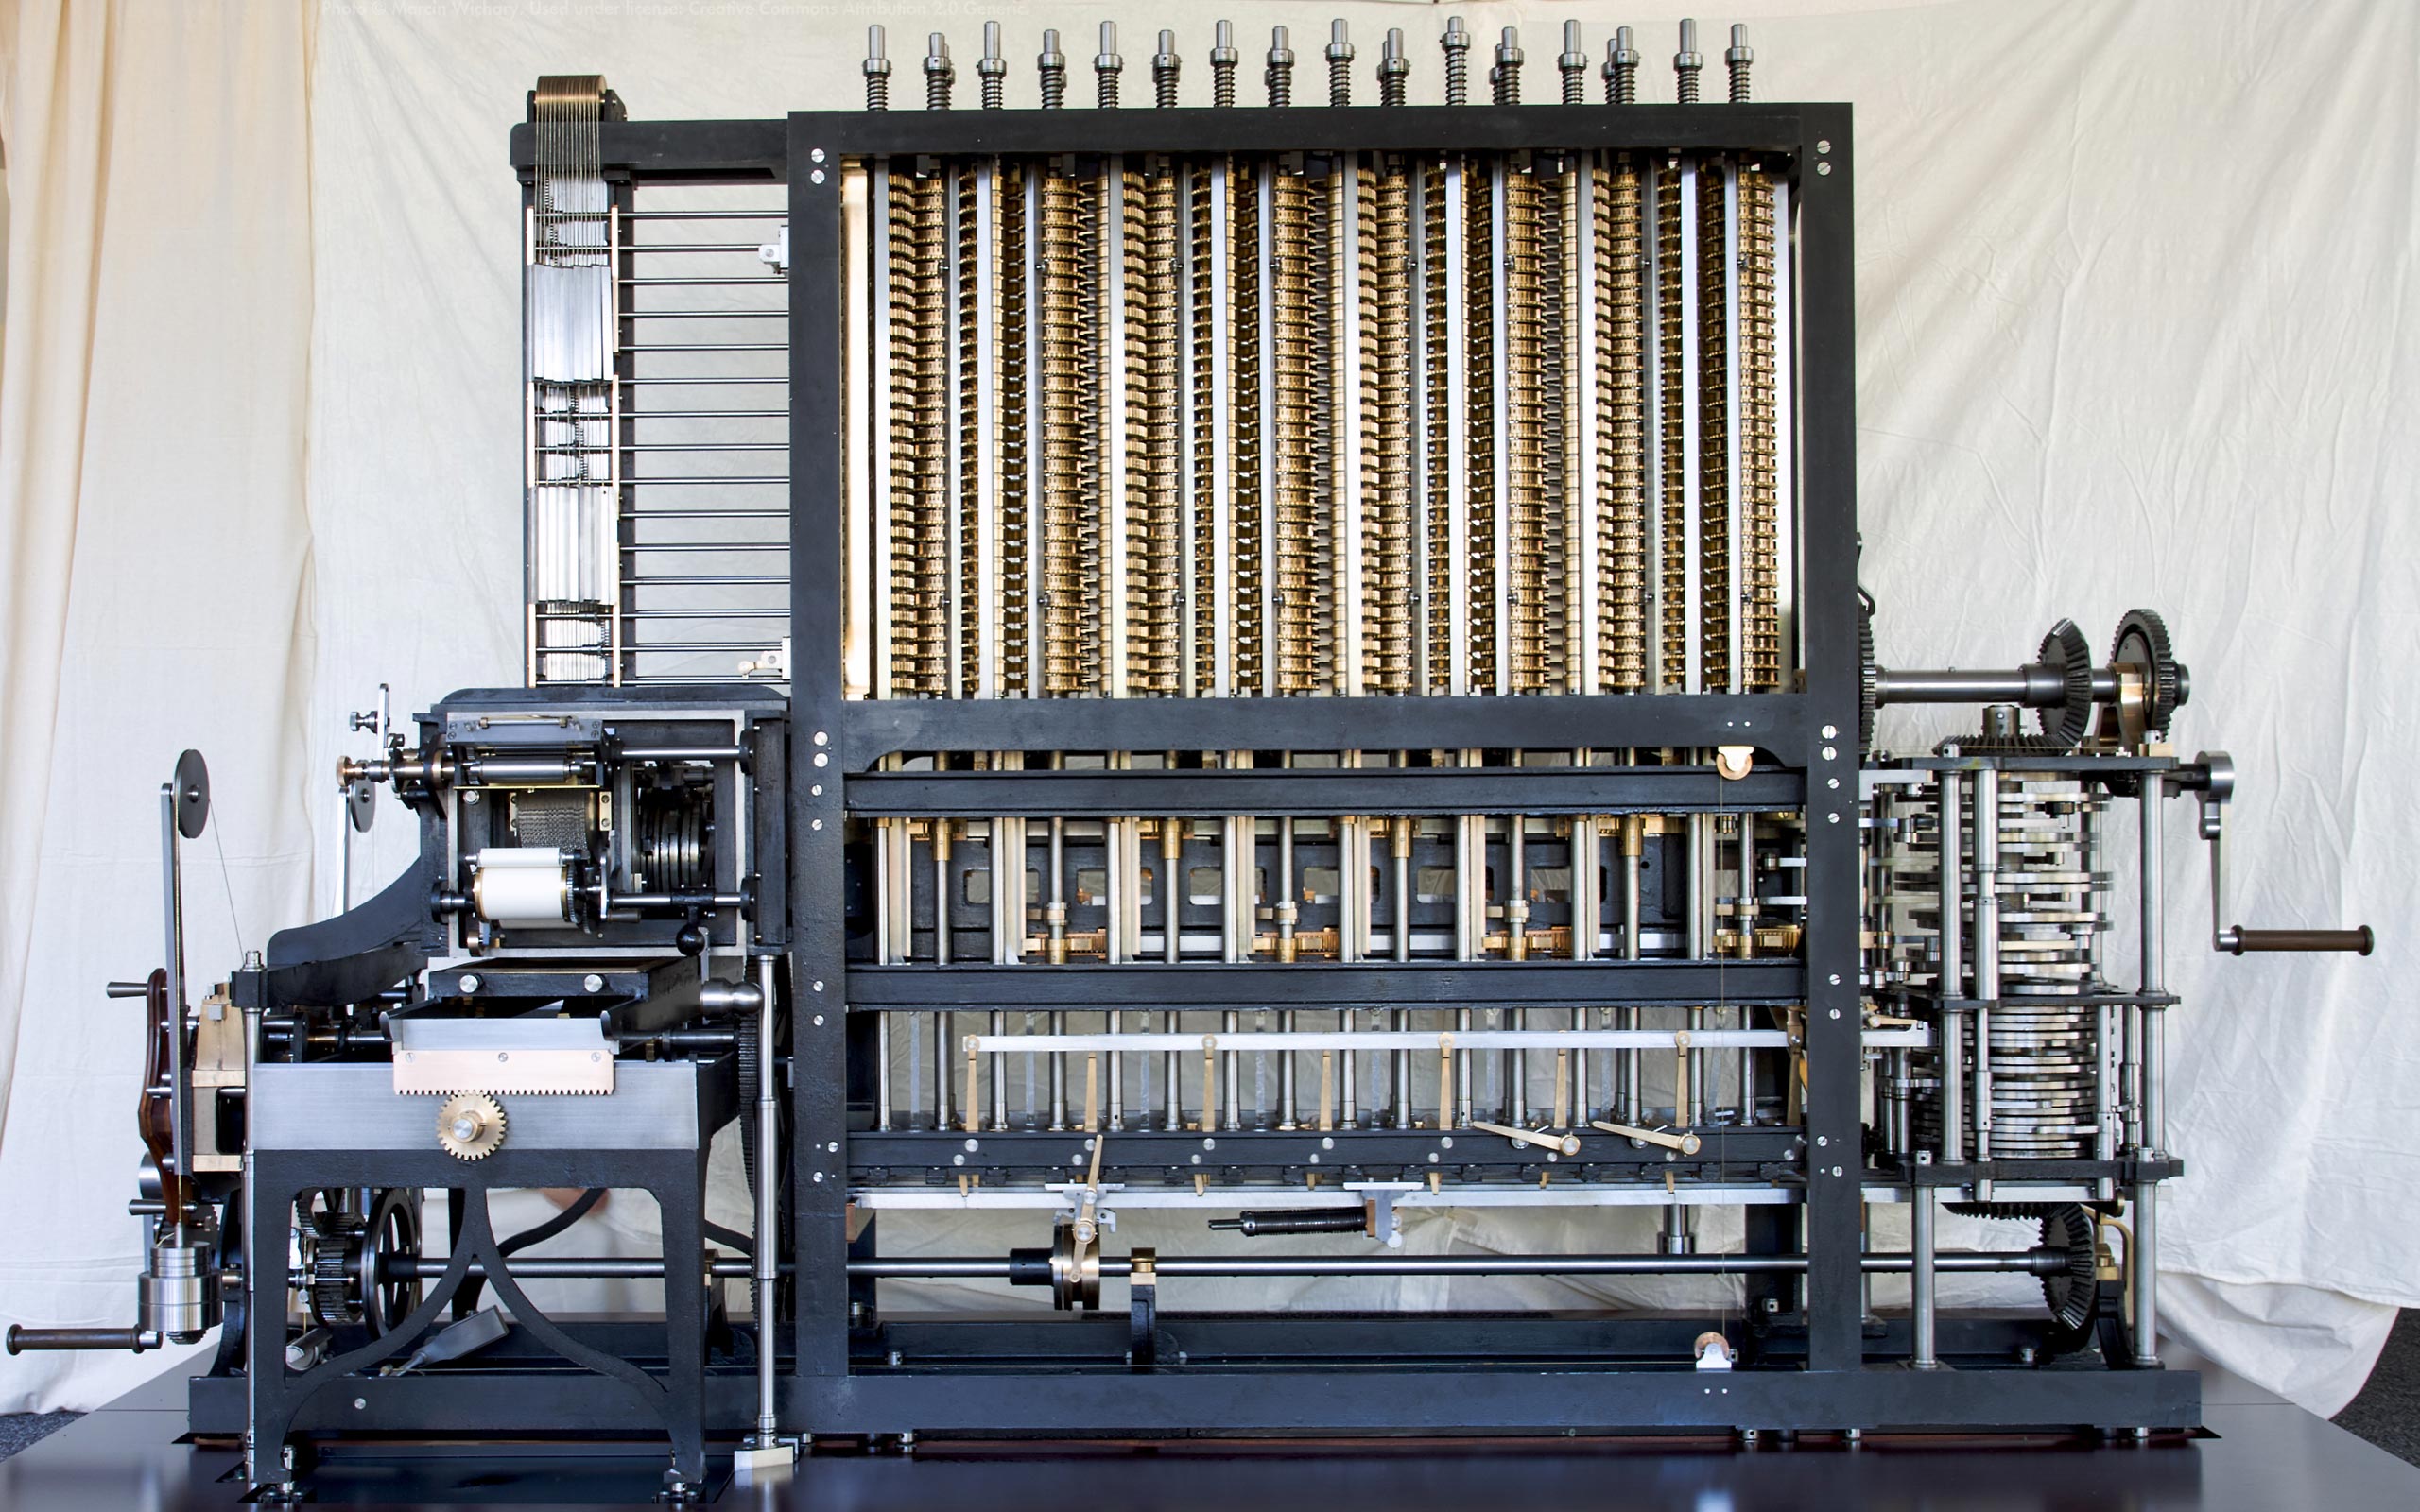 Difference Engine Wallpapers